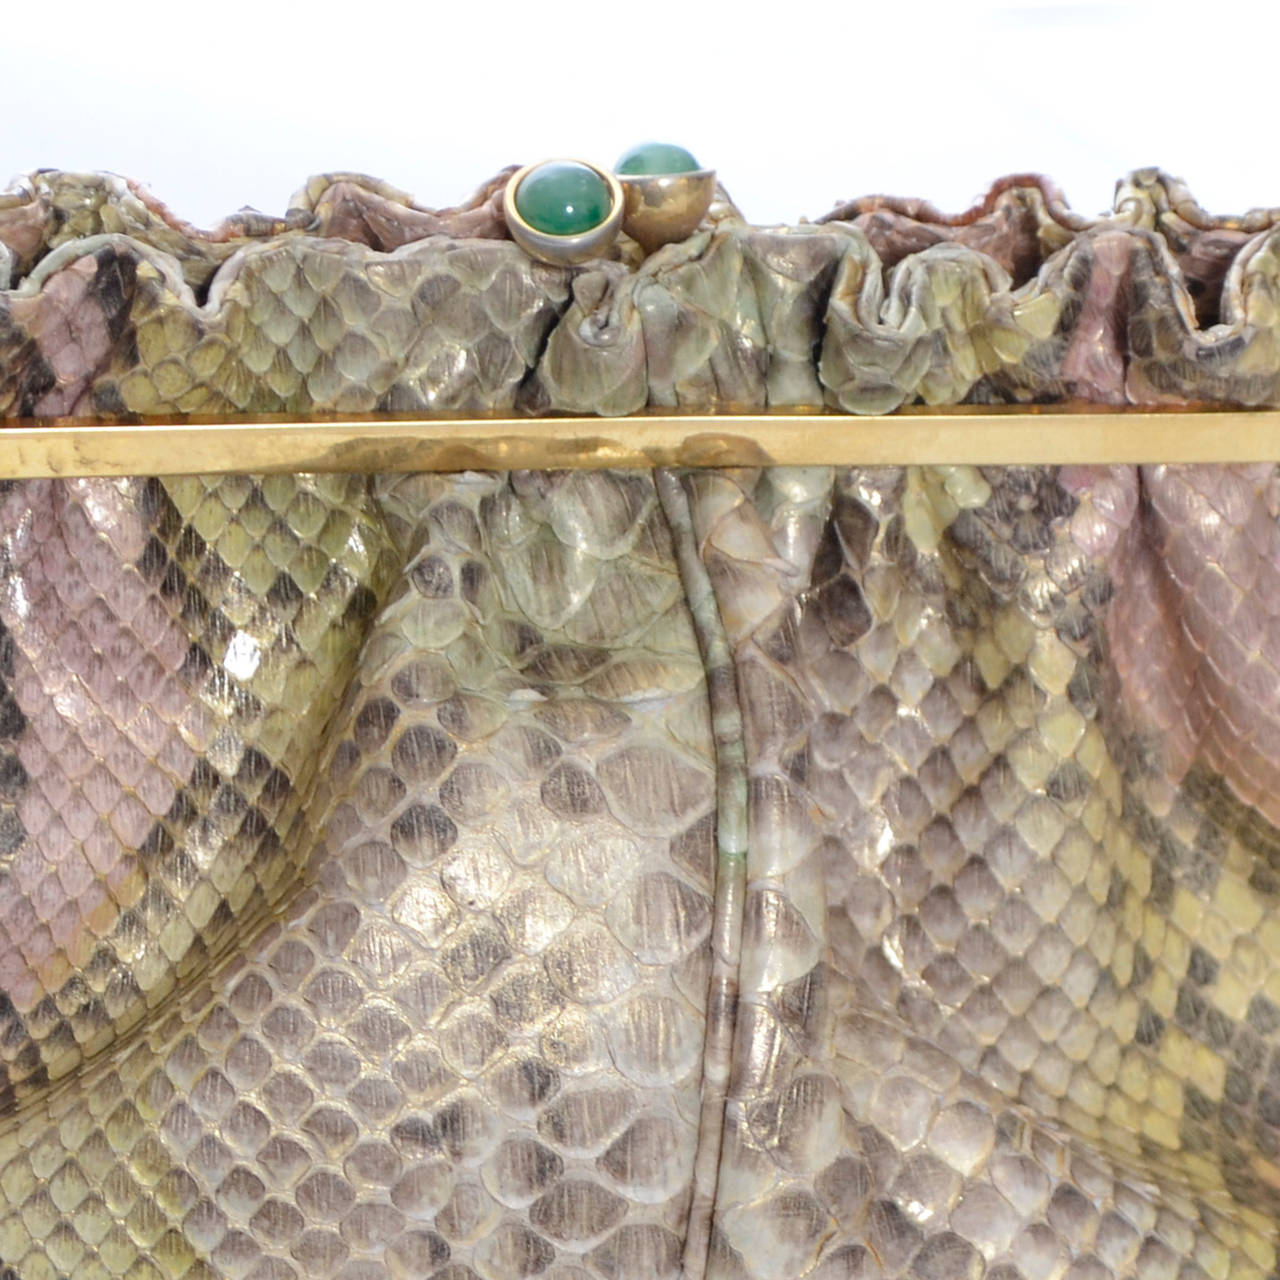 This is an authentic vintage Judith Leiber snake skin handbag that can be worn as a shoulder bag or used as a clutch purse.  The bag is fully lined and comes with its original coin purse and mirror. This handbag measures 10 inches wide, 6 inches